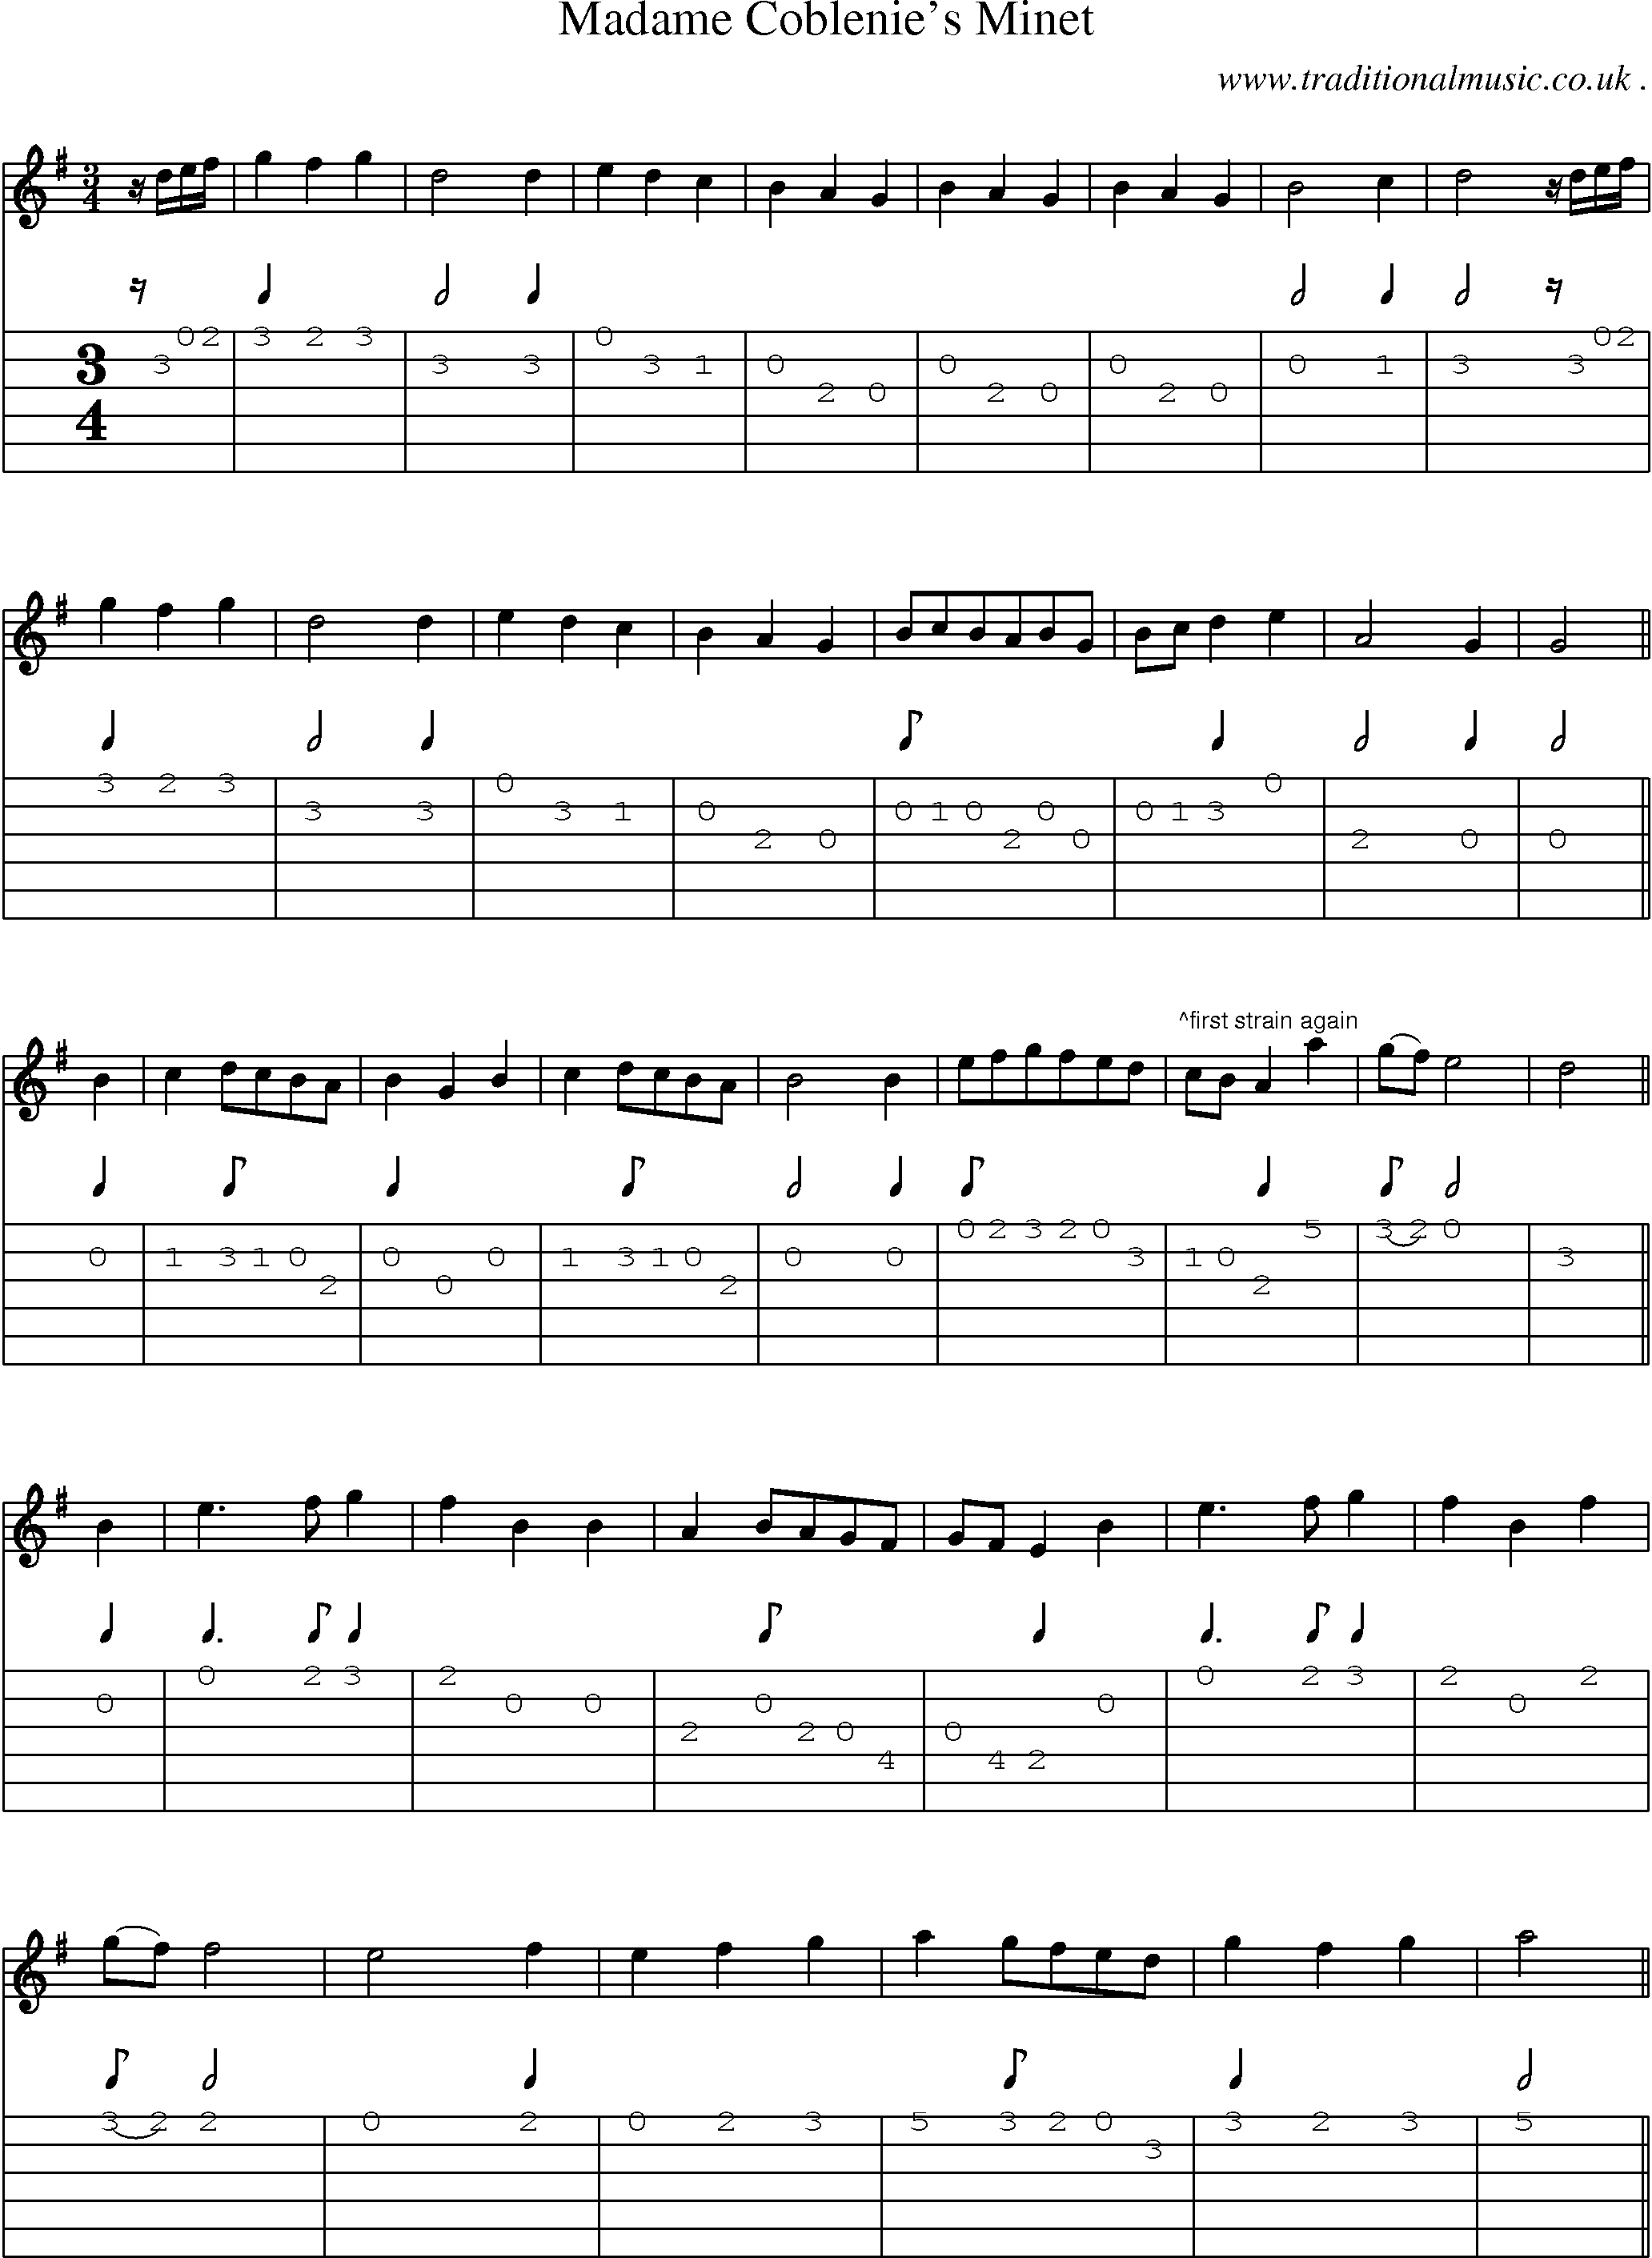 Sheet-Music and Guitar Tabs for Madame Coblenies Minet